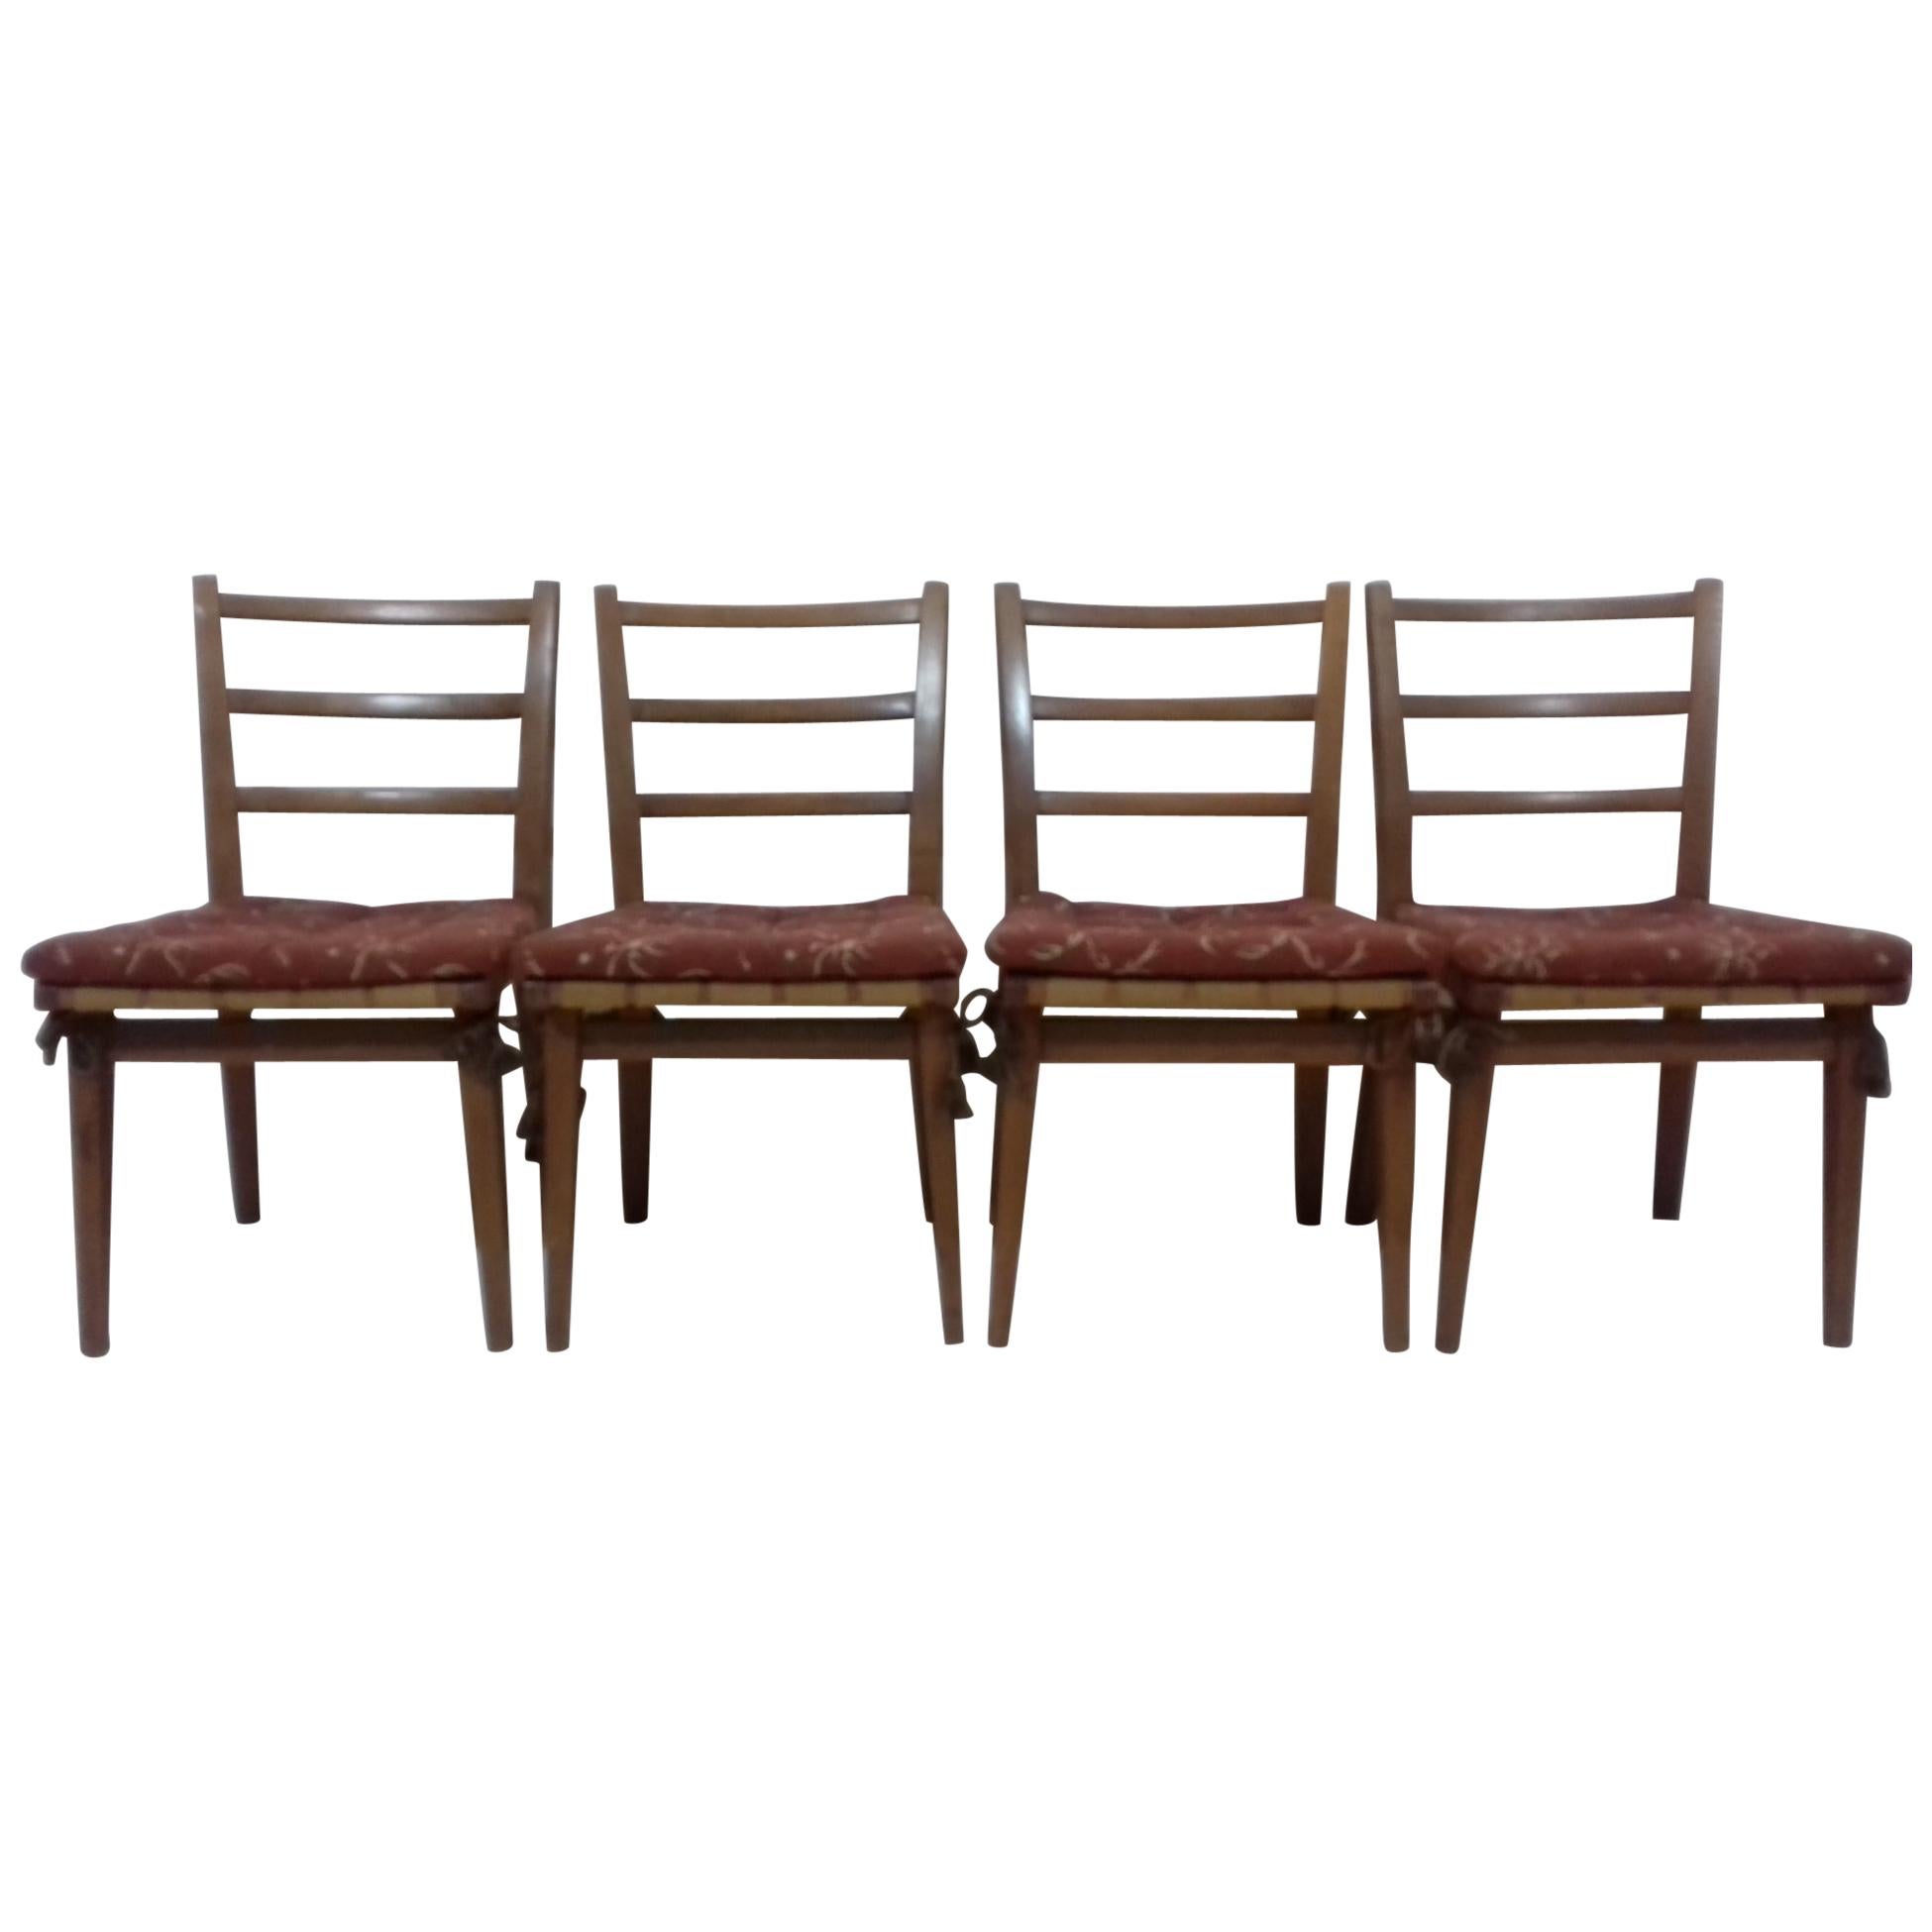 Set of Four Dining Chairs by Jan Vaněk, 1955